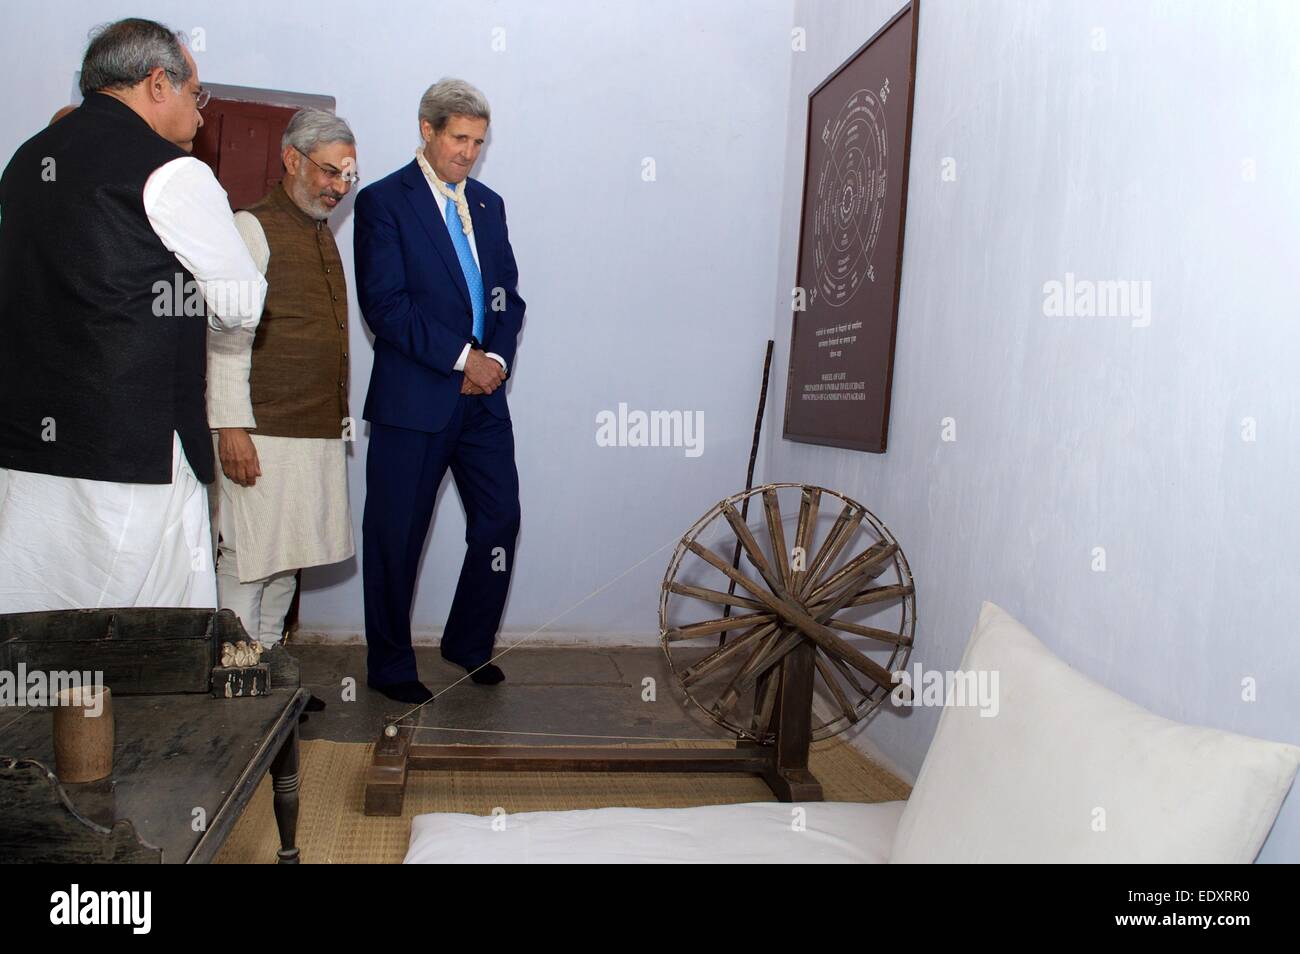 US Secretary of State John Kerry views the bed, desk, and spinning wheel used by Mohandas Gandhi during a visit to the Sabarmati Ashram, where Ghandi lived January 11, 2014 in Ahmedabad, India. Stock Photo